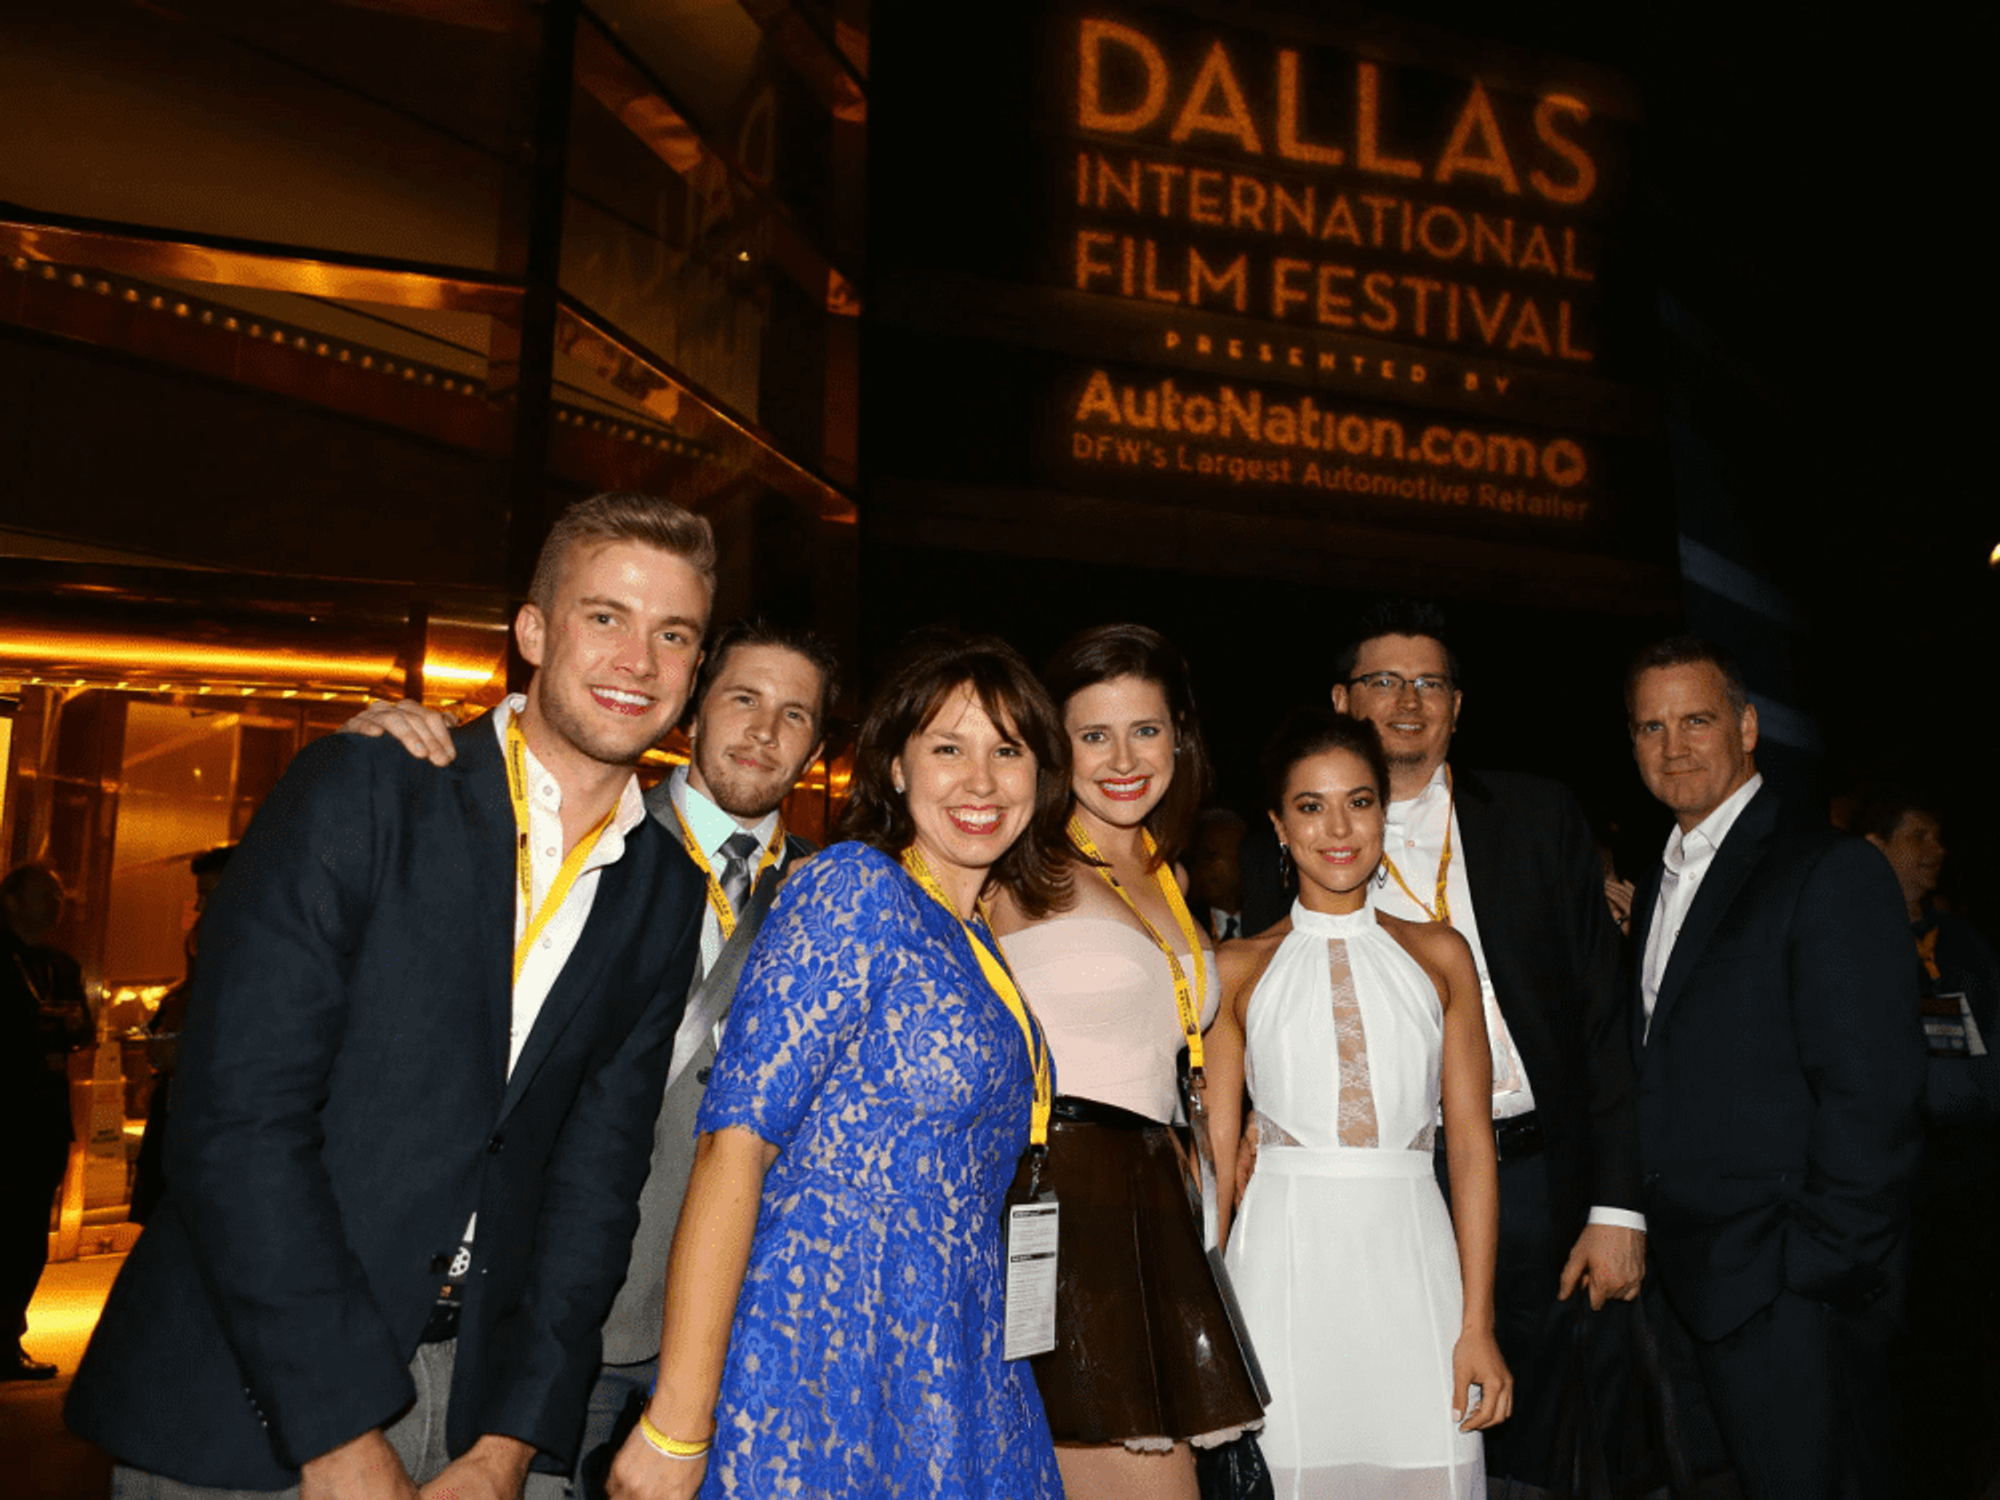 The Dallas International Film Festival will take place April 14-24 at multiple venues.